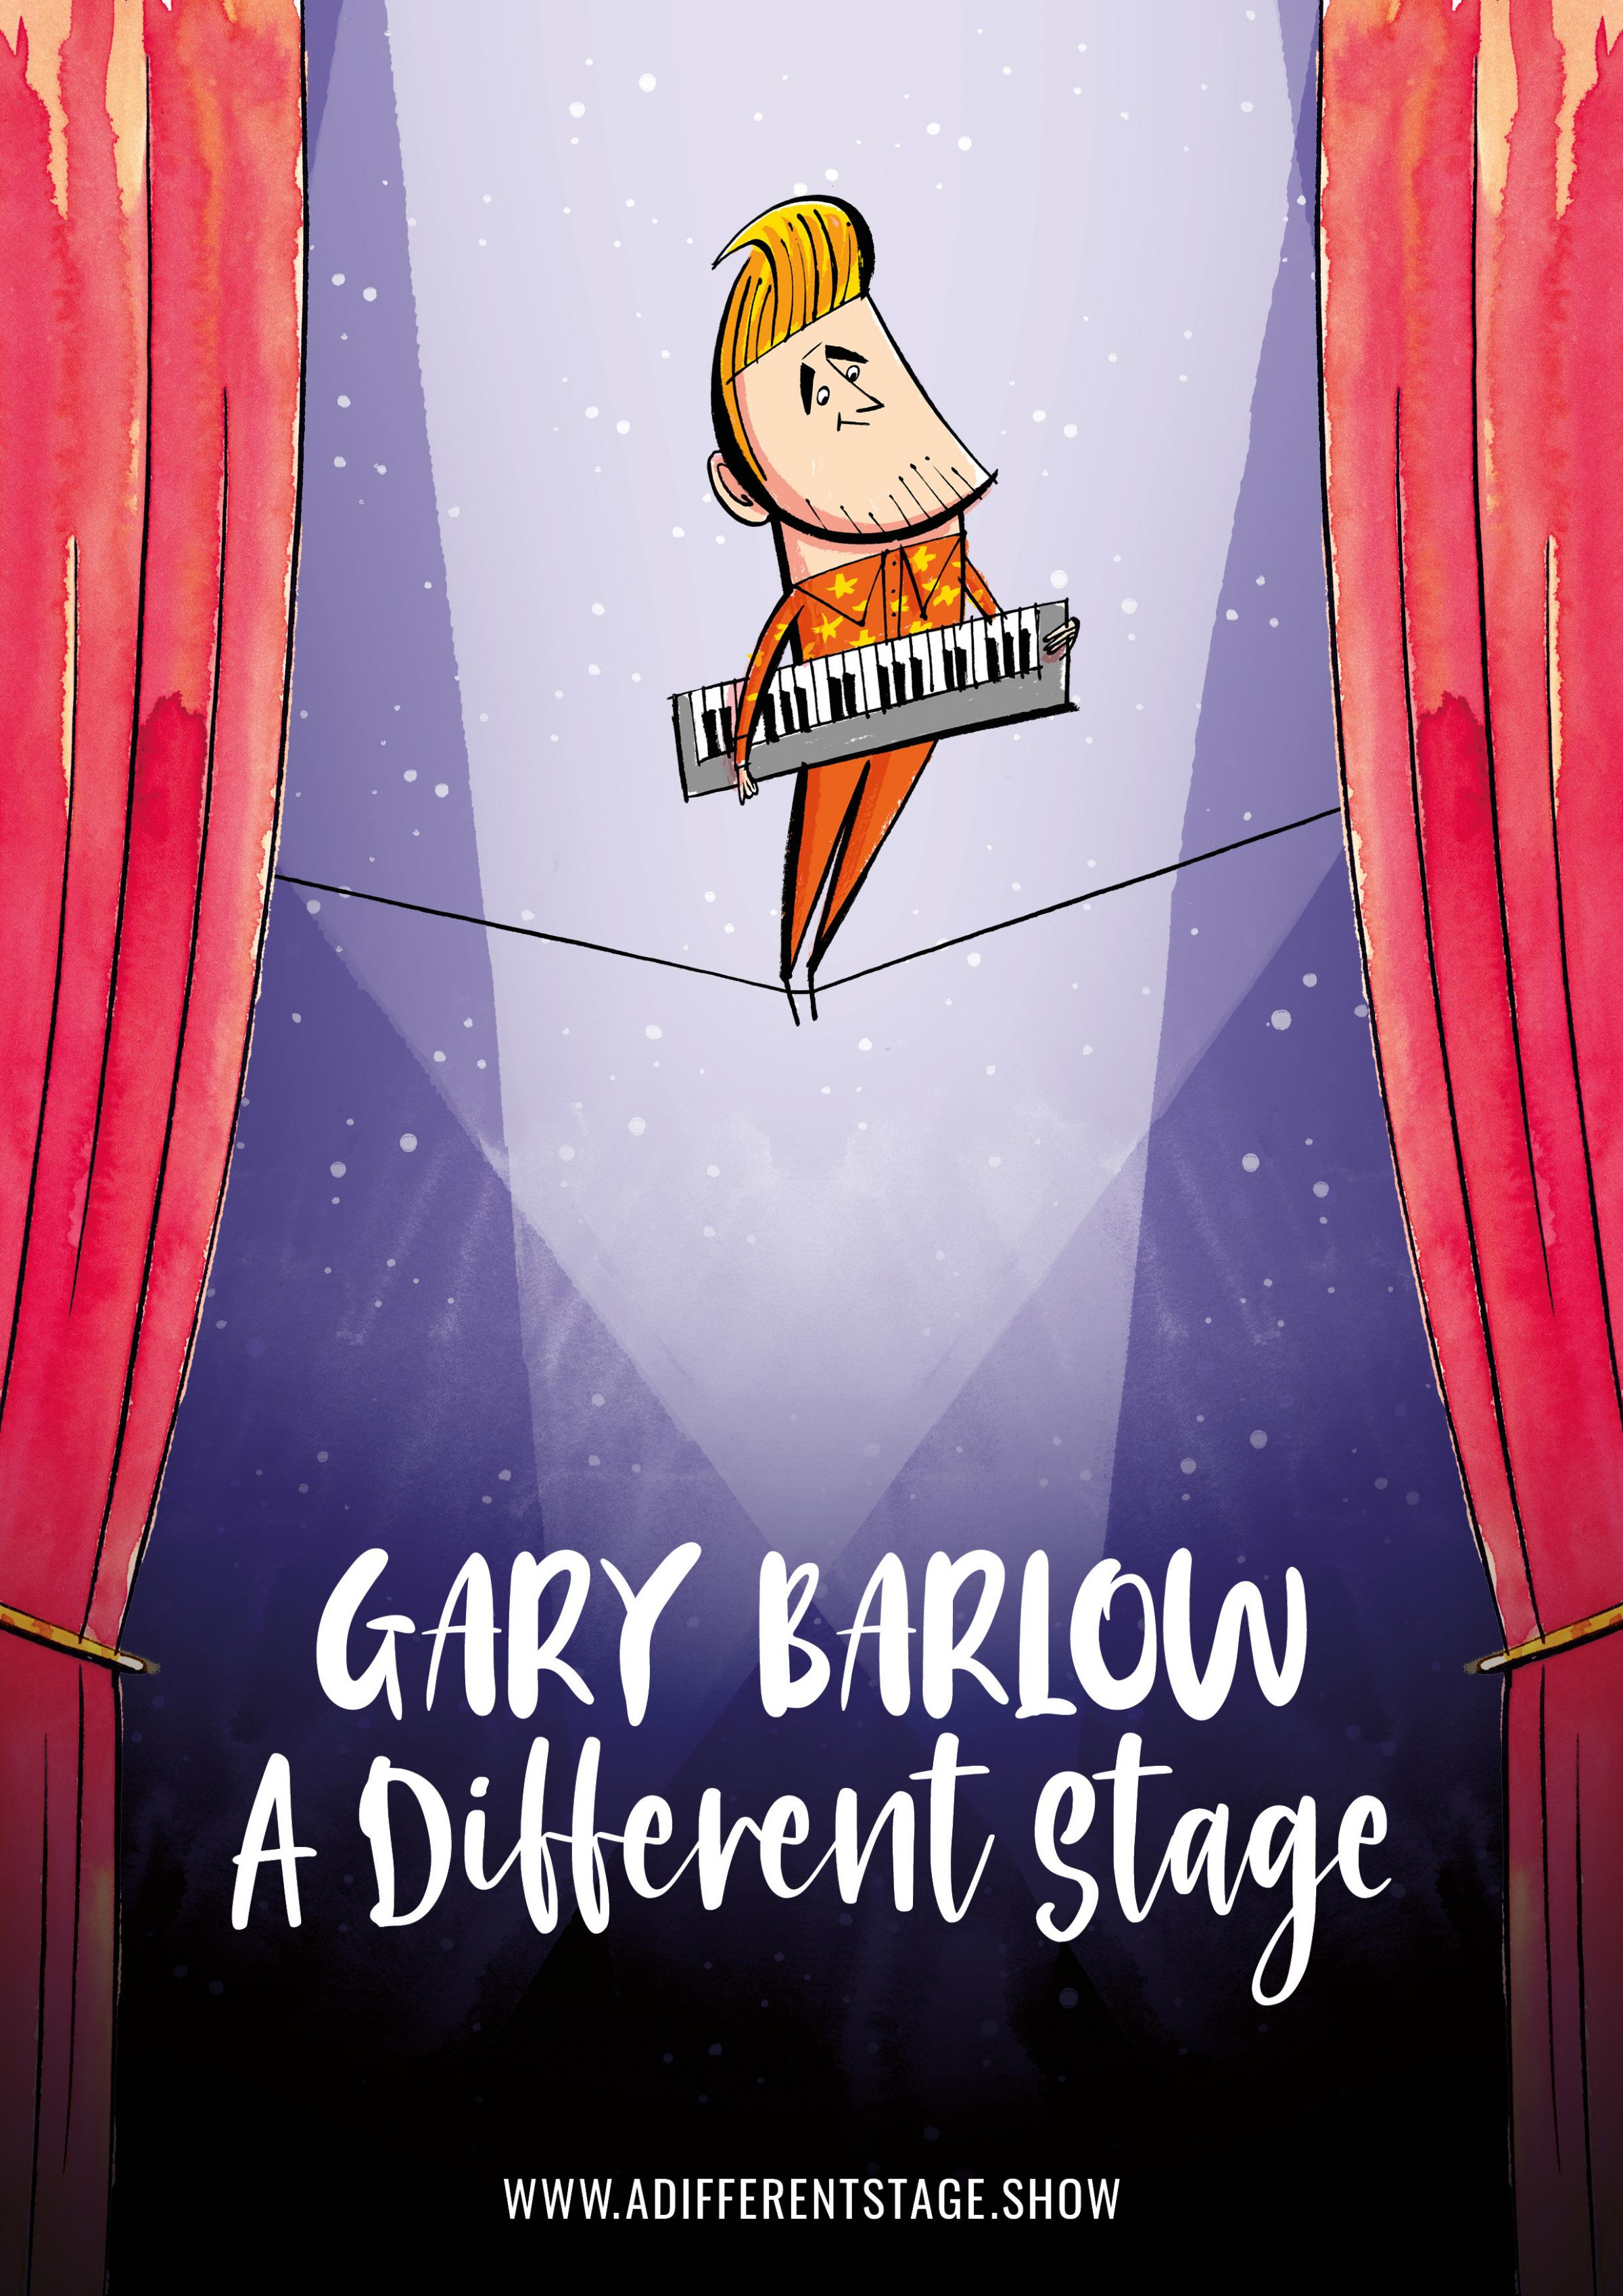 Gary Barlow is bringing one-man show to The Lowry